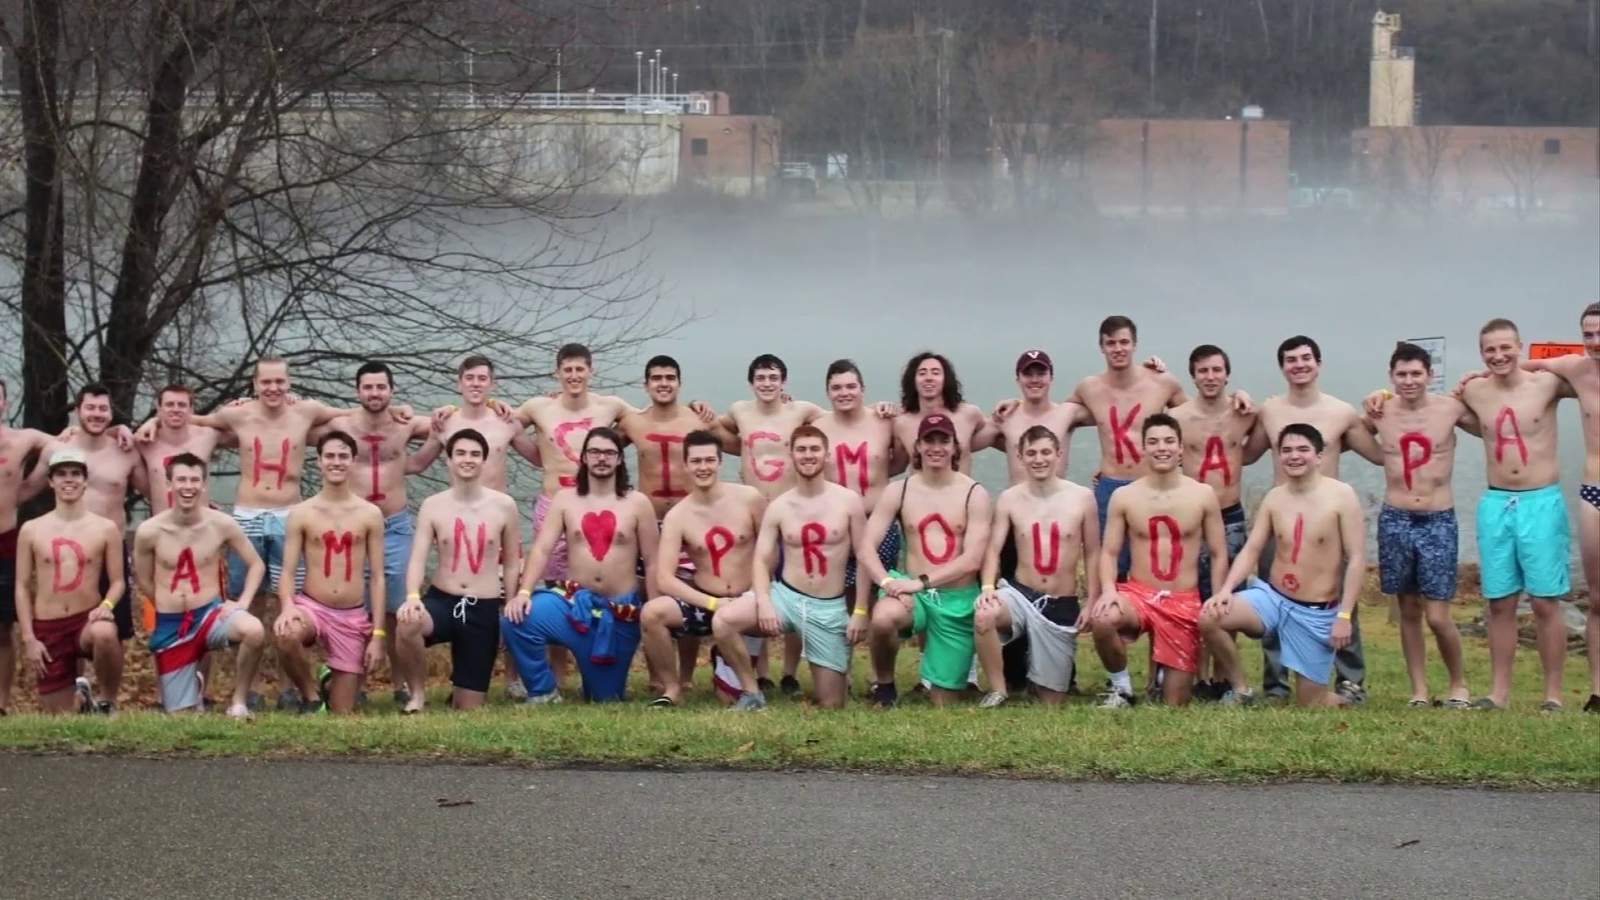 Virginia Tech fraternity shares passion for Special Olympics by taking Polar Plunge